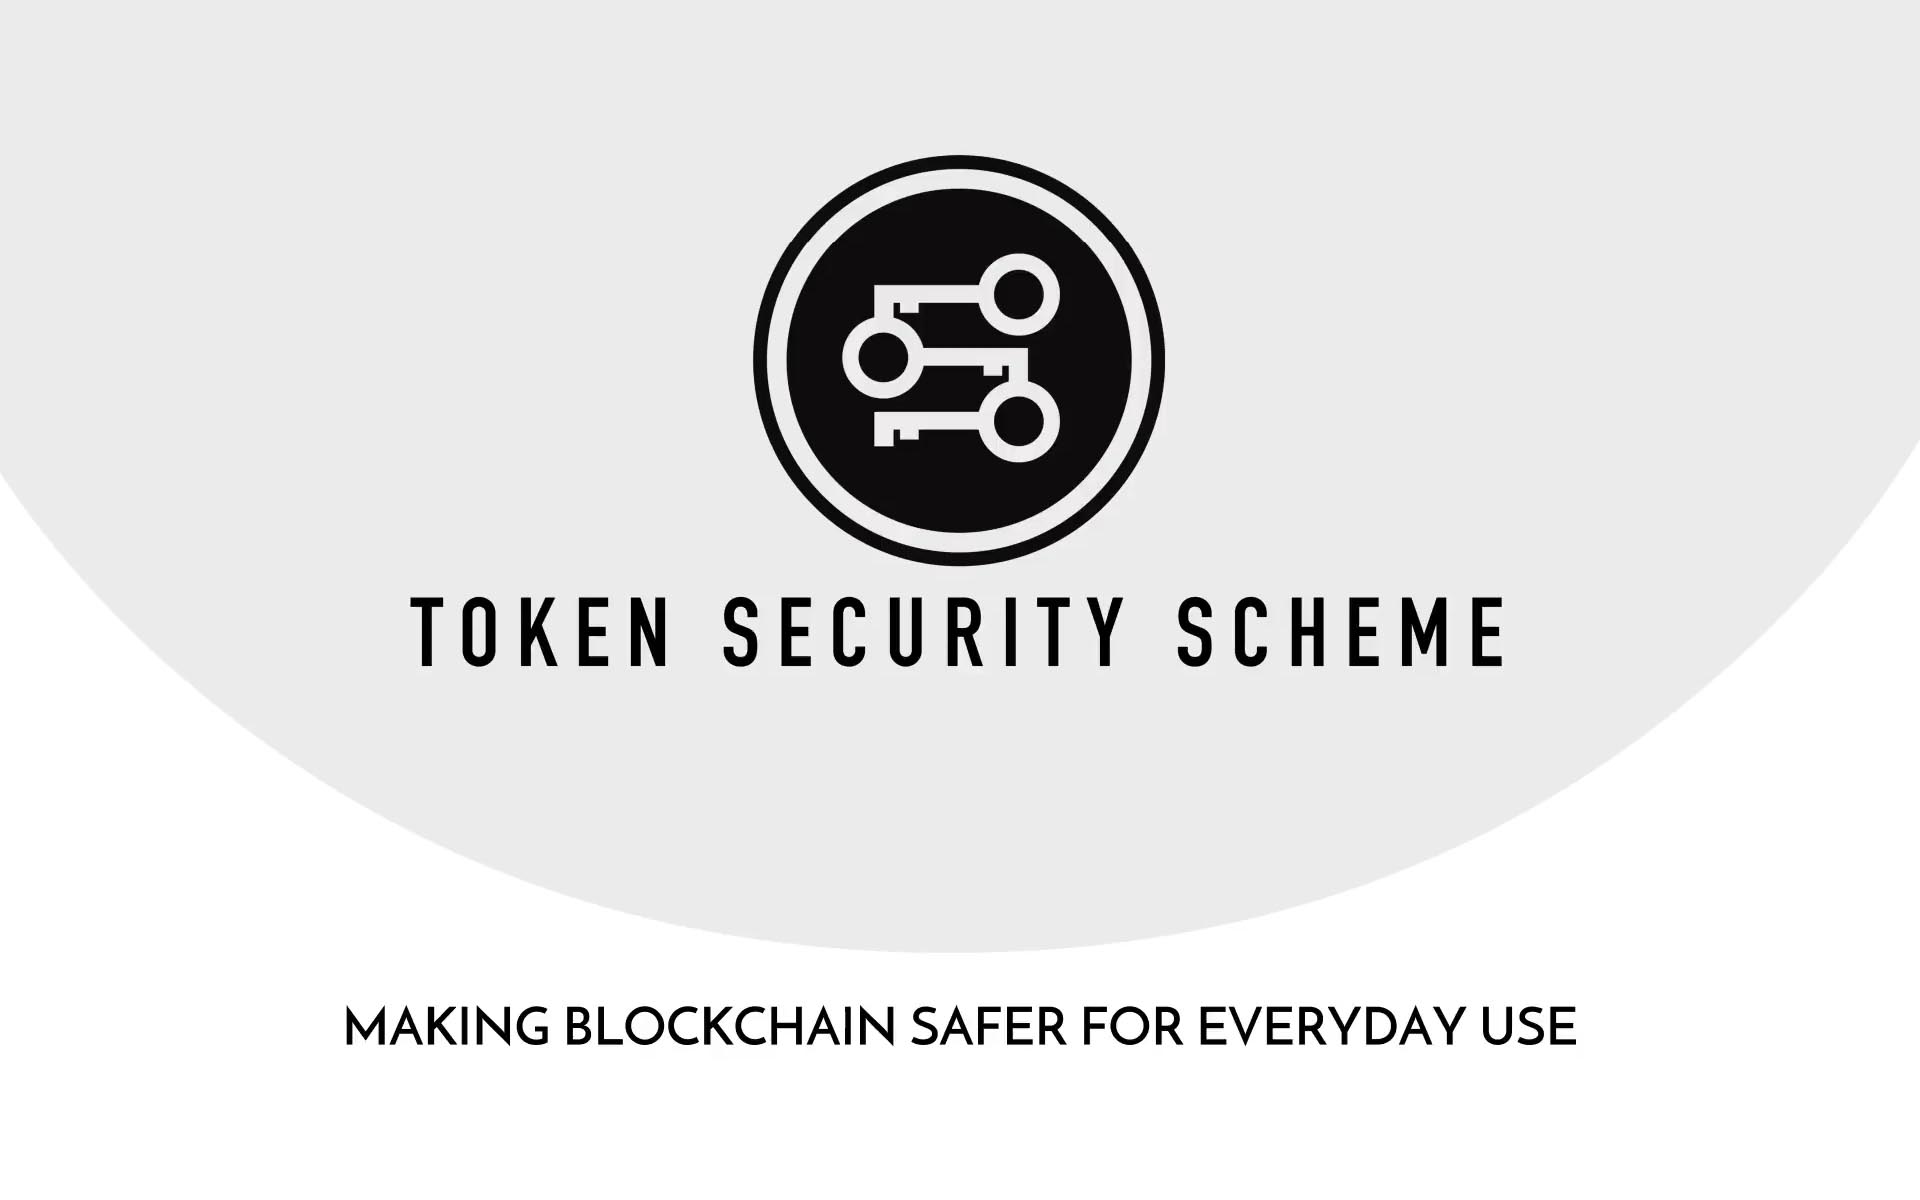 Safe, Secure and Sought-After: Improving Trust via Crypto-Security with the Token Security Scheme